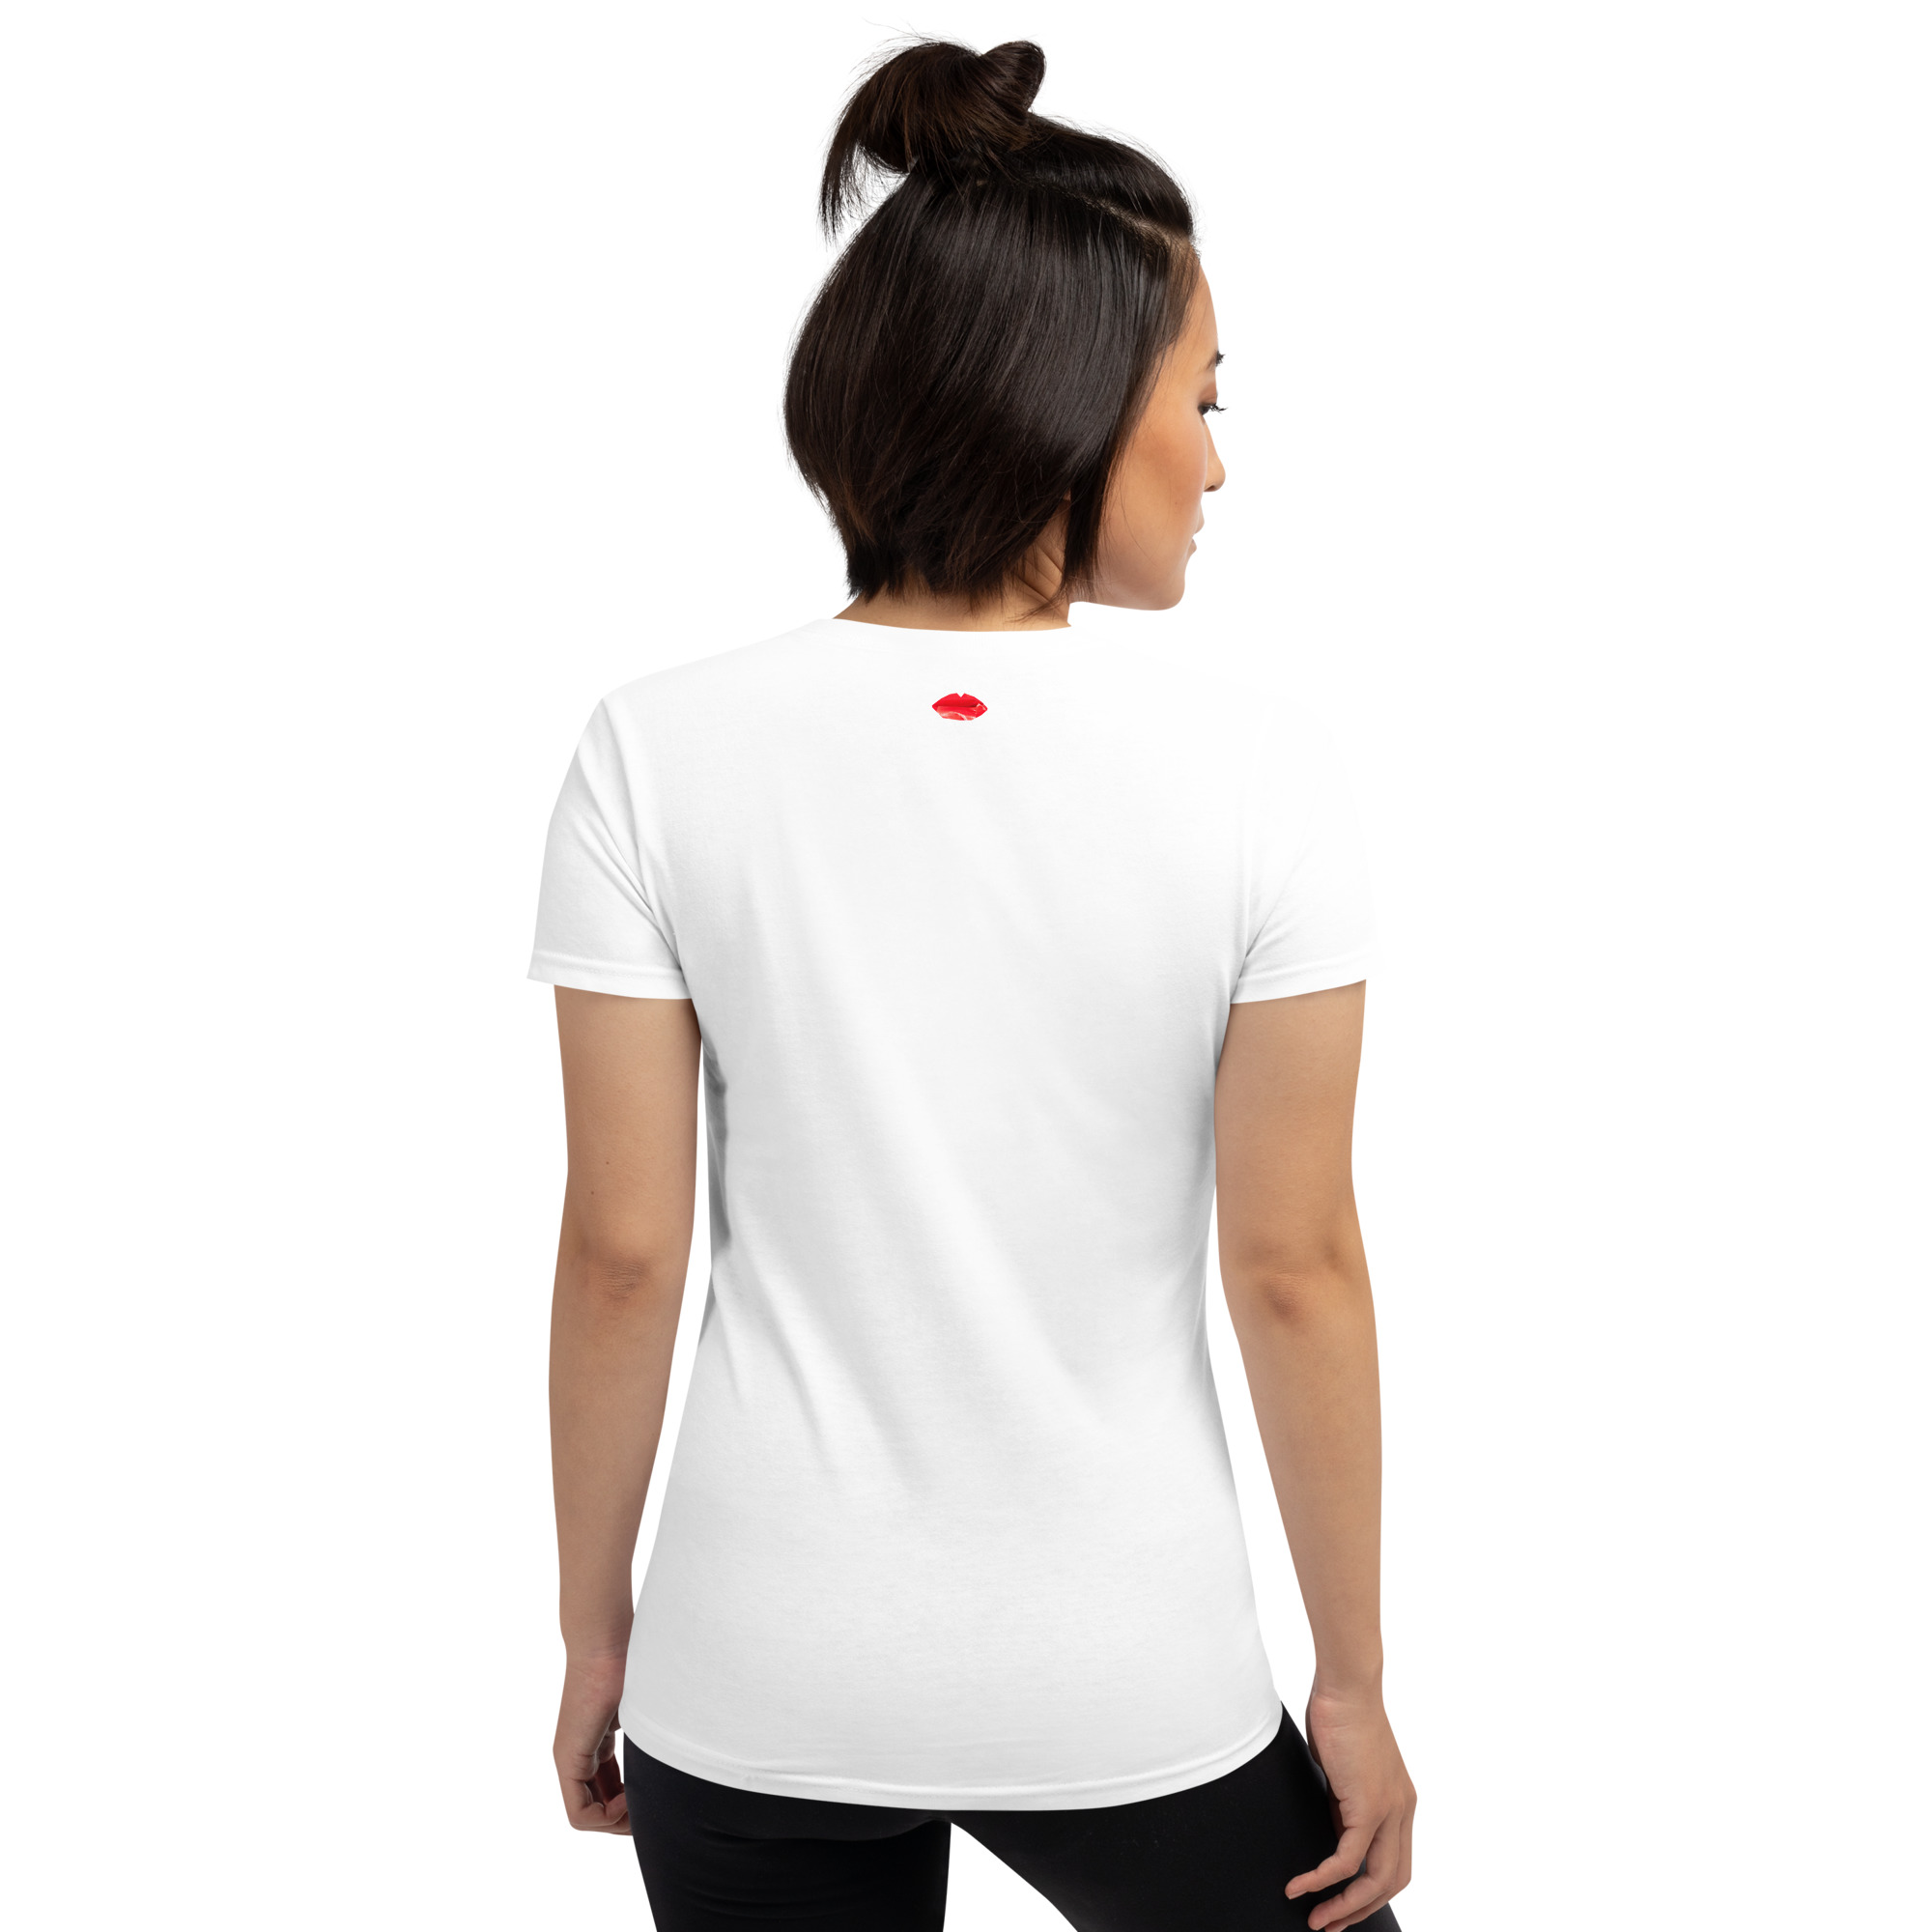 womens-loose-crew-neck-tee-white-back-62e7cac3bb79a.jpg